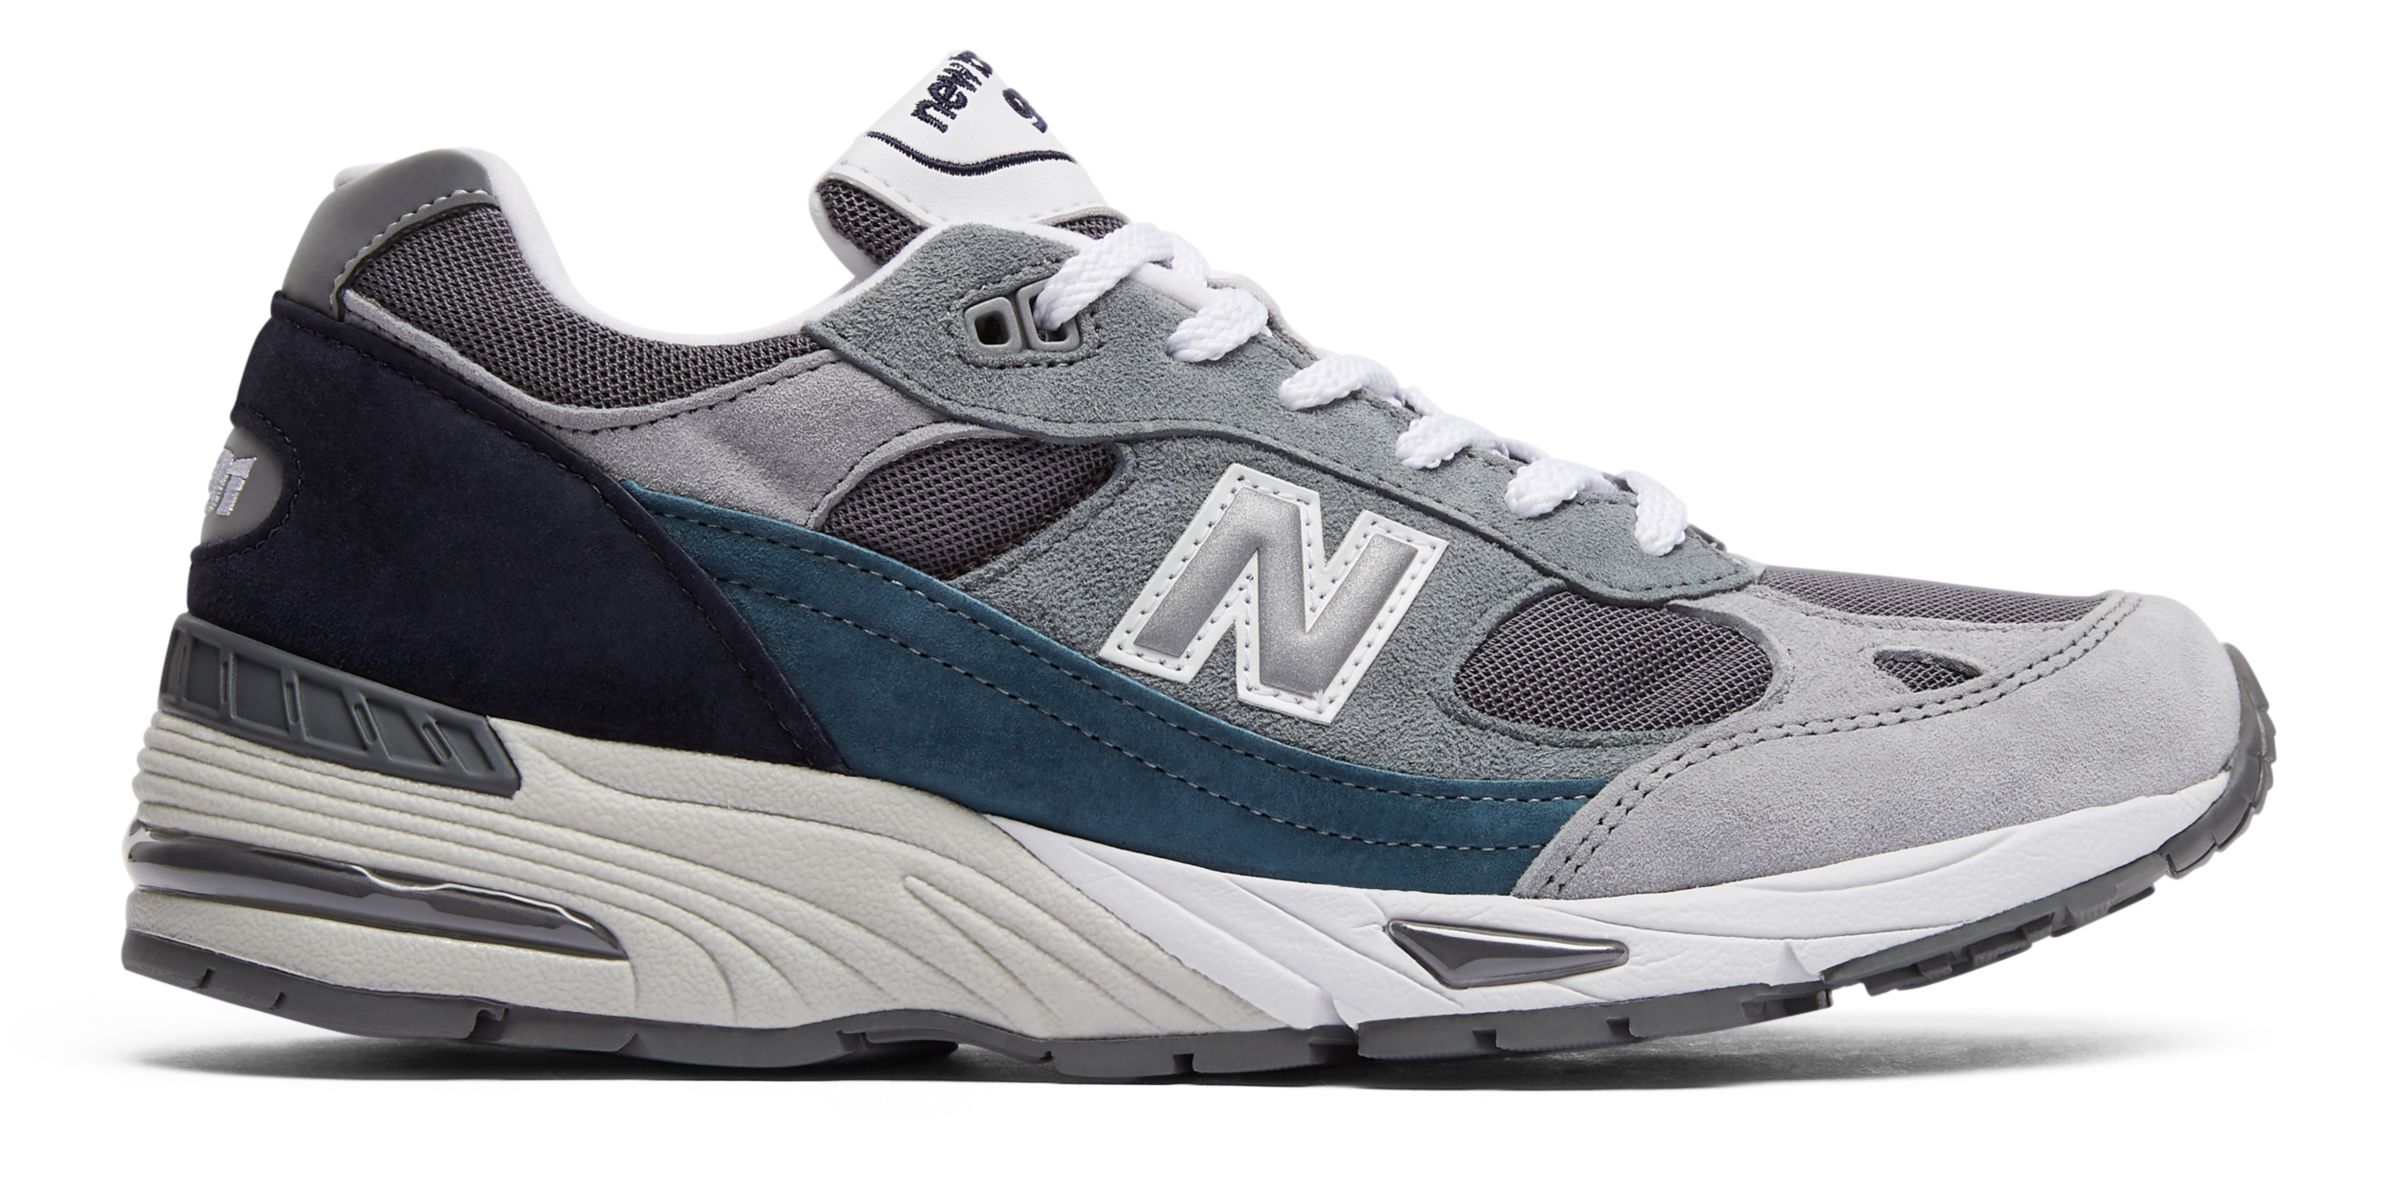 Men's Made in UK 991 Lifestyle Shoes - New Balance